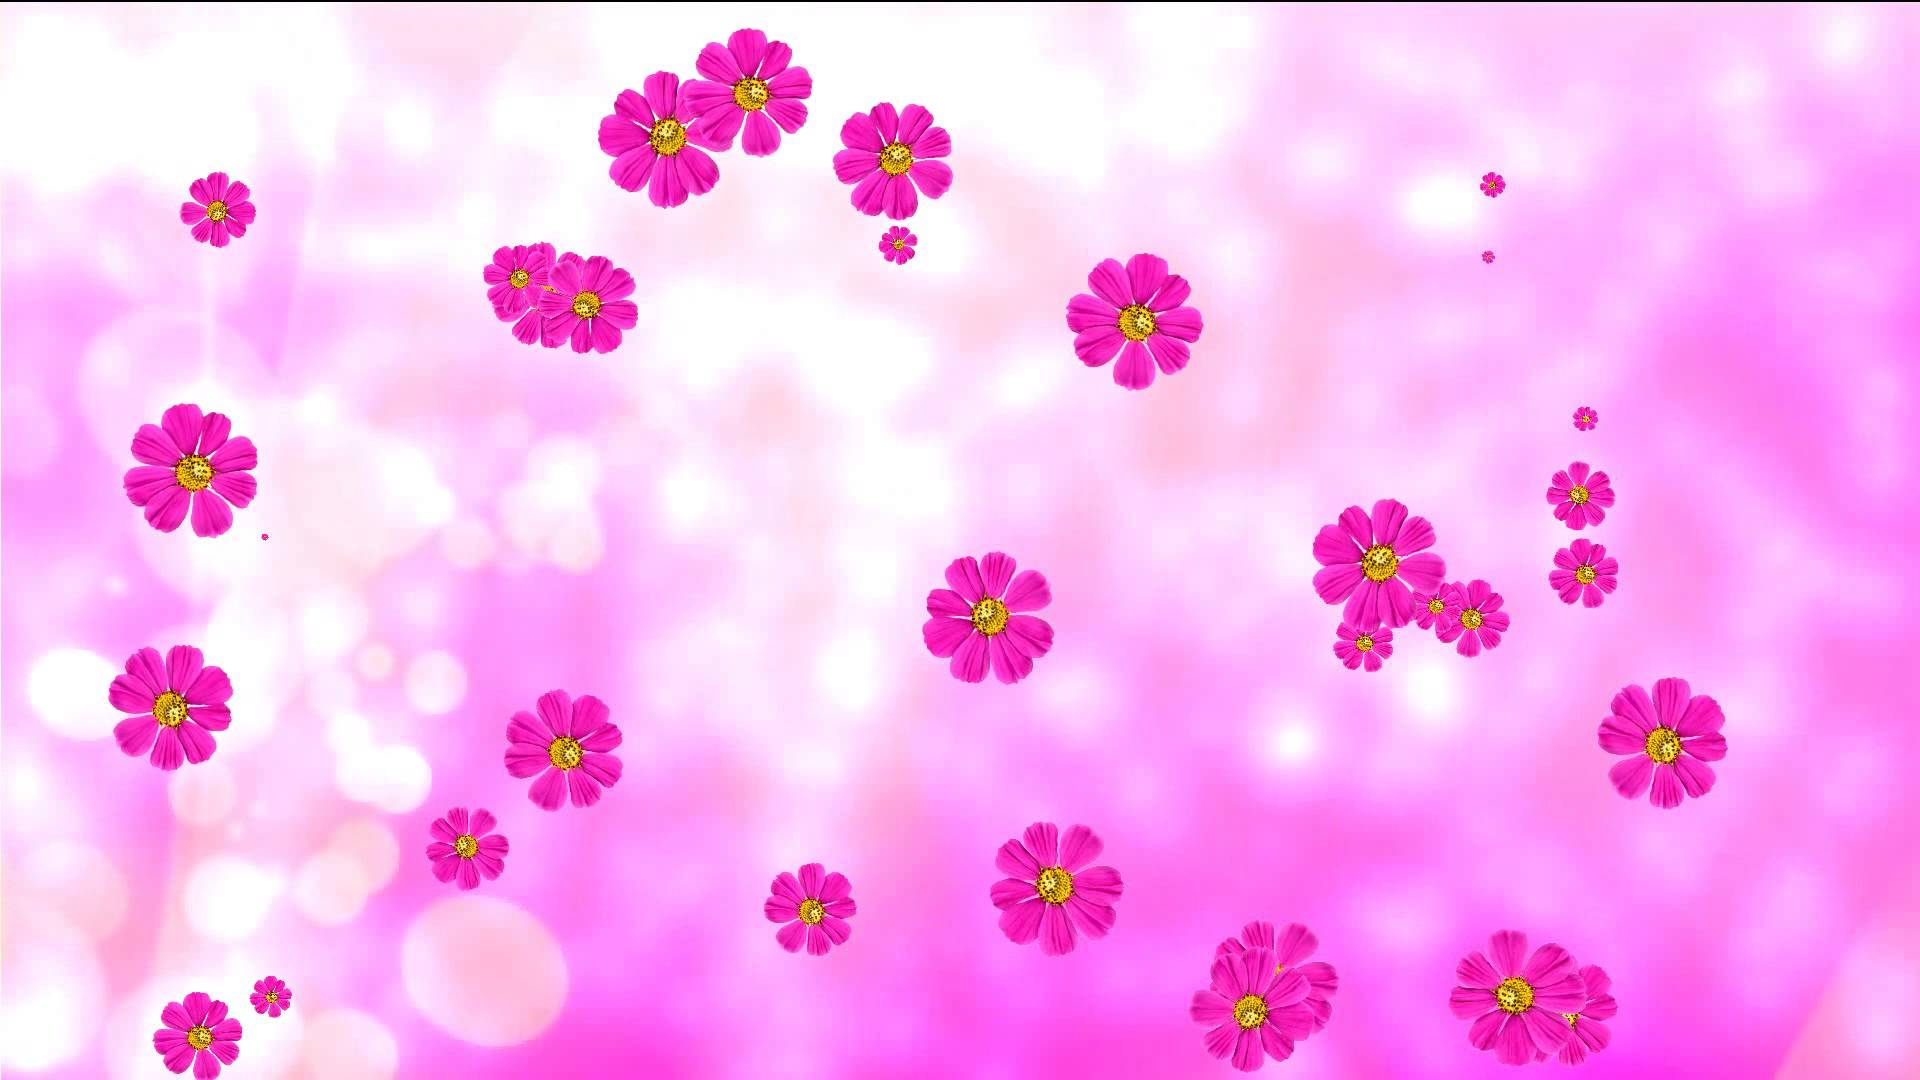 Purple animated flowers and pink background. Flower background